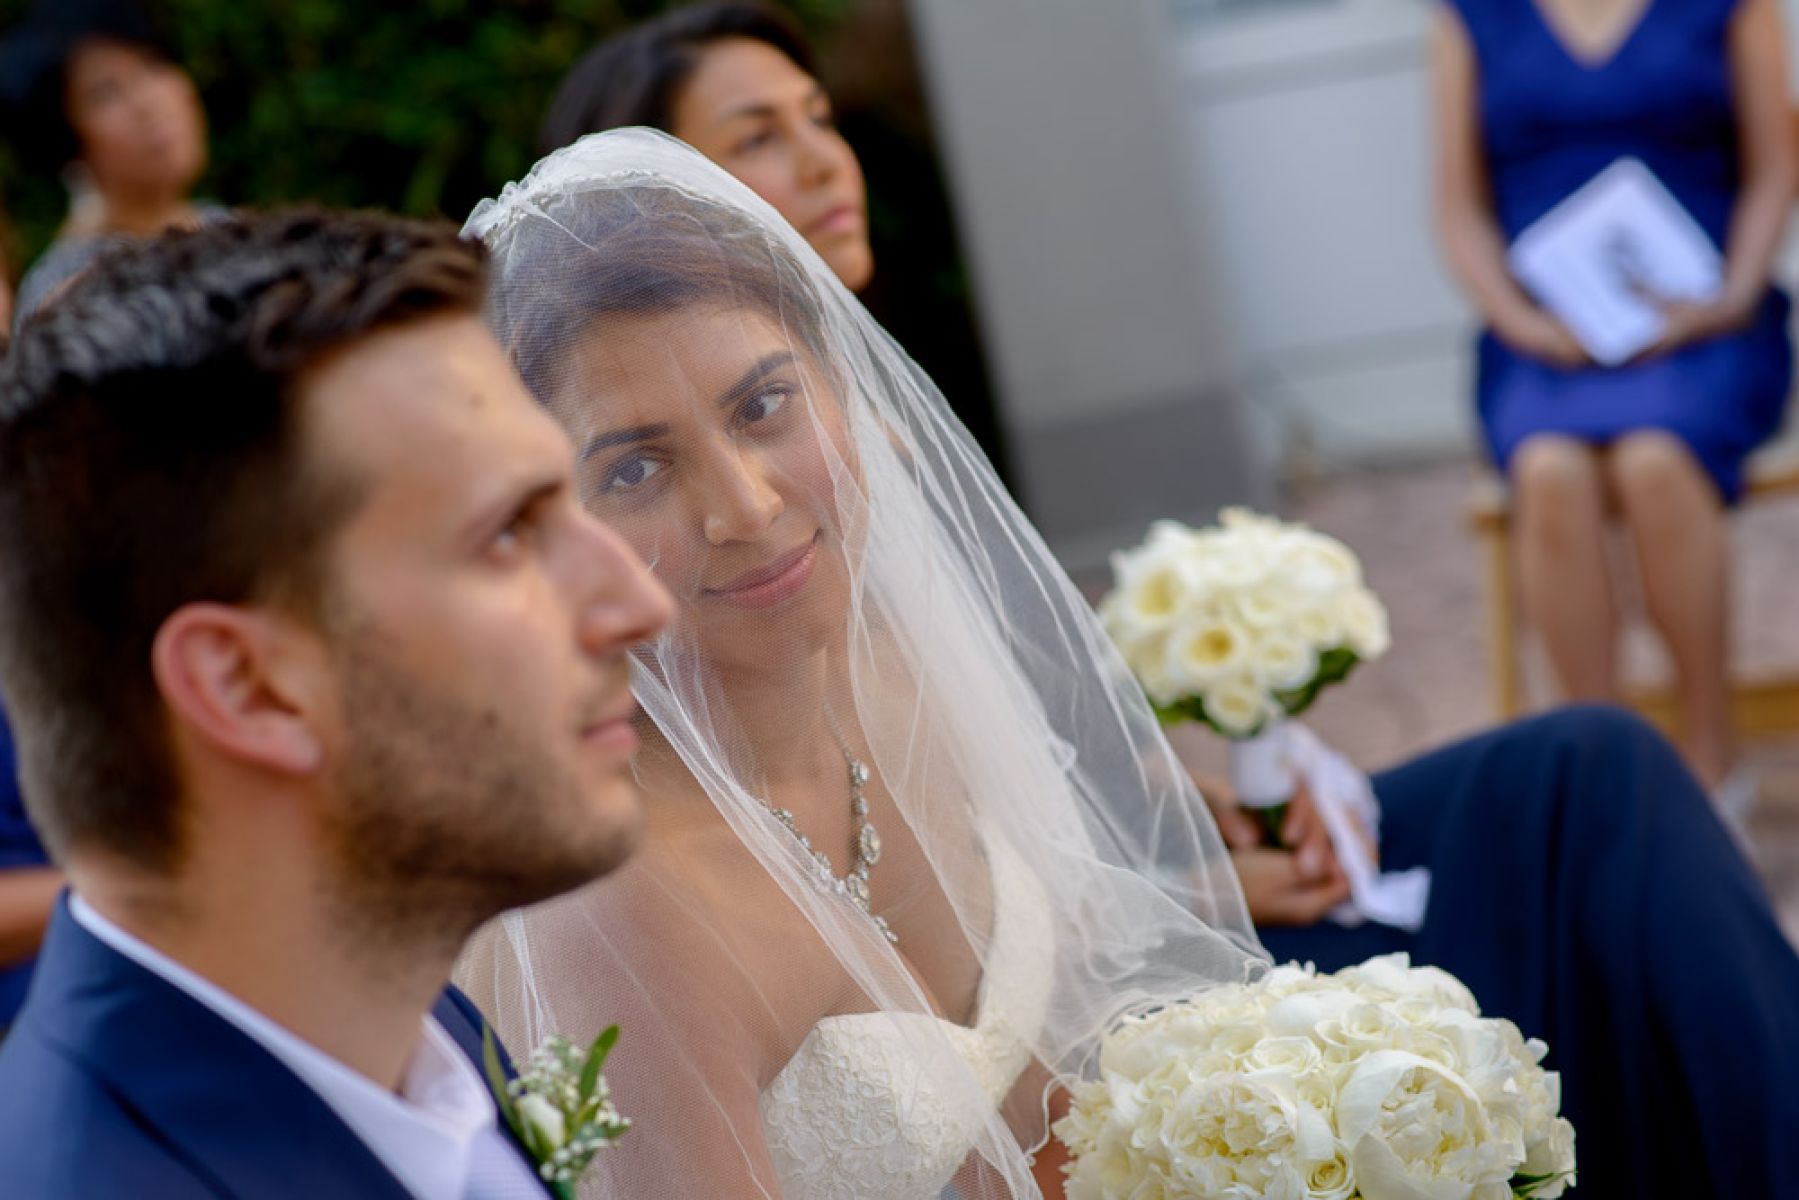 jordanphotography wedding in athens next day photoshoot in london 115 9576233c